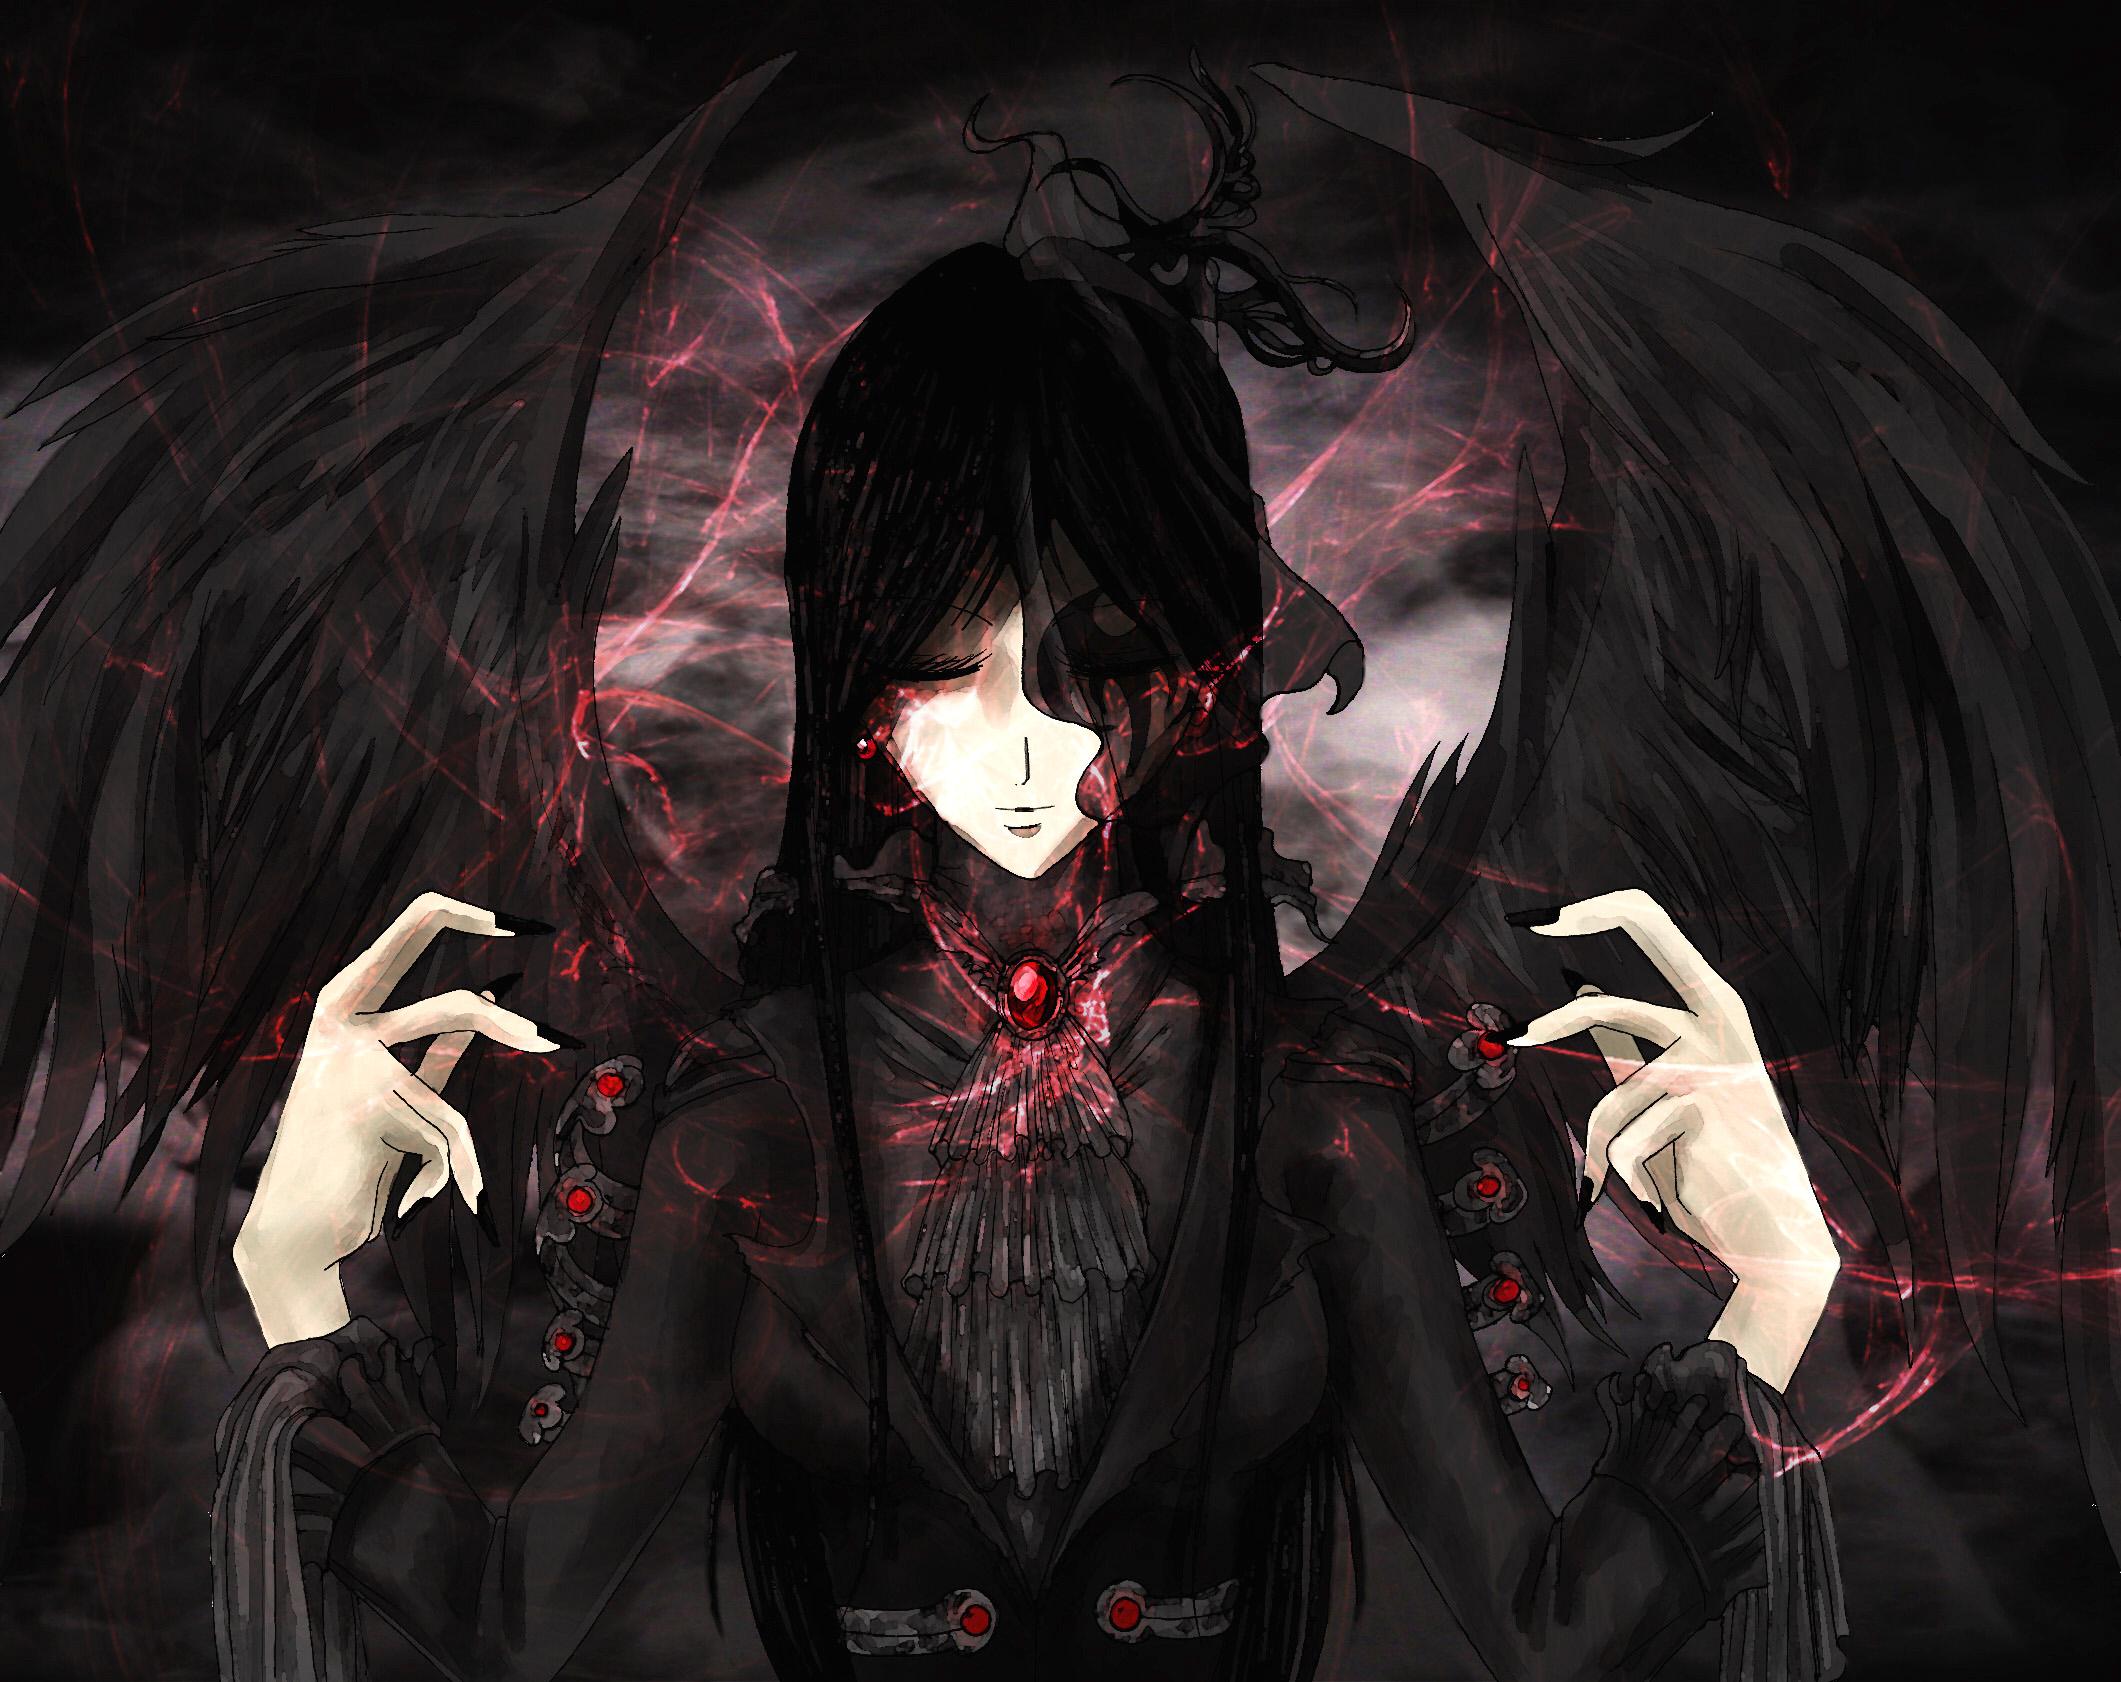 Dark Angel desktop wallpaper by VolatileFortune - Anime inspired image depicts a mysterious angel in a dark setting.